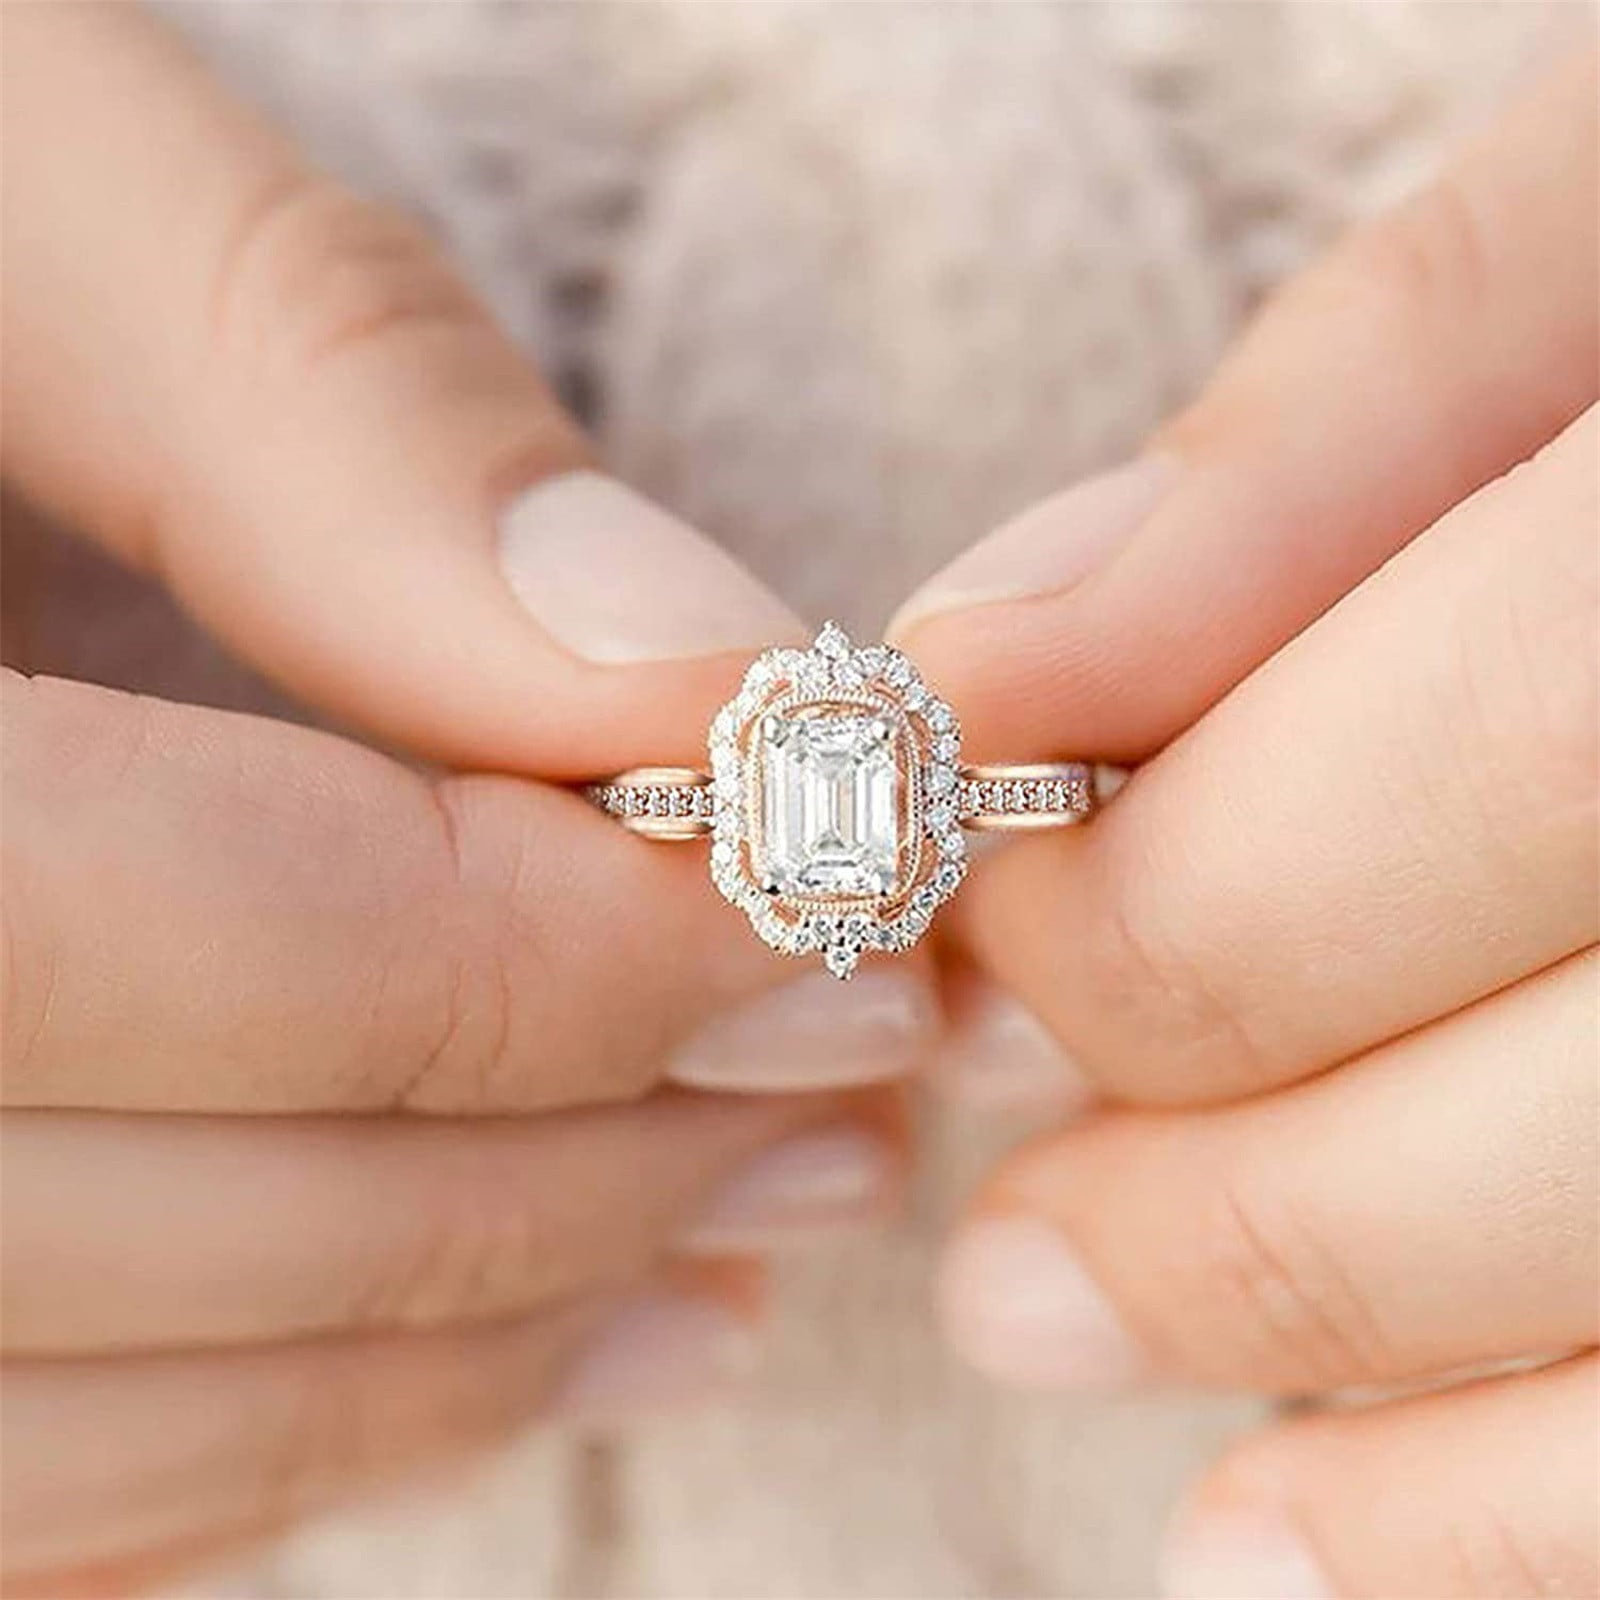 Love these rings! Add one to your stack, as your wedding band, or just as a fashion  ring! #DiamondBand #DiamondRing #WeddingRing #GiftI... | Instagram